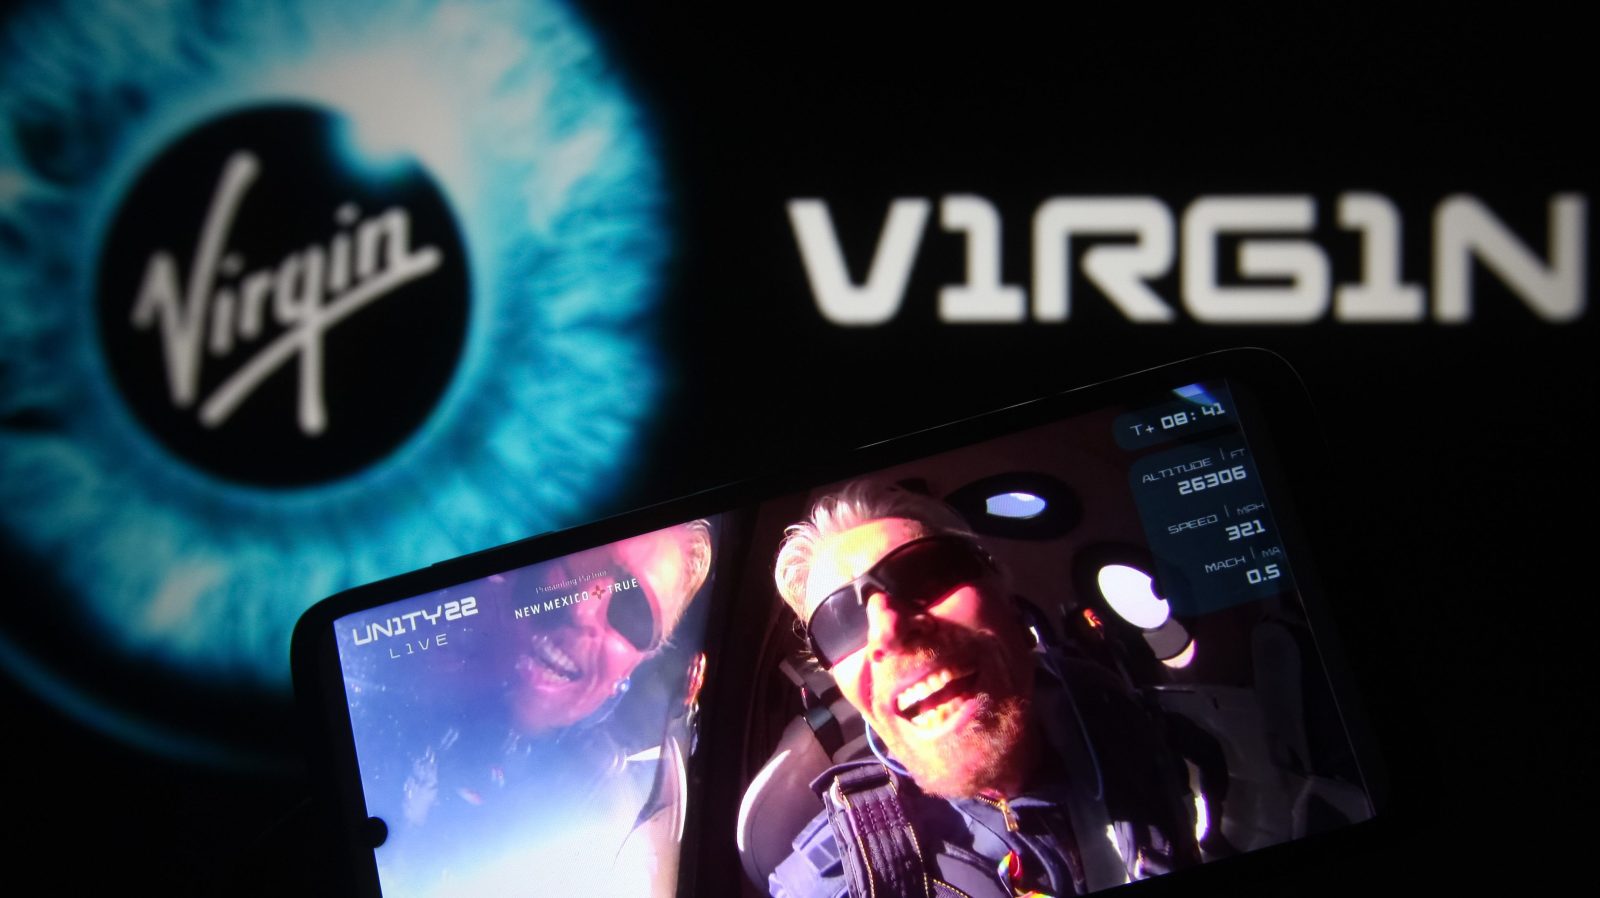 In this photo illustration, British billionaire Richard Branson is seen on a fragment of a Virgin Galactic Unity 22 Spaceflight Livestream Youtube video displayed on a smartphone with the Virgin Galactic logo in the background.